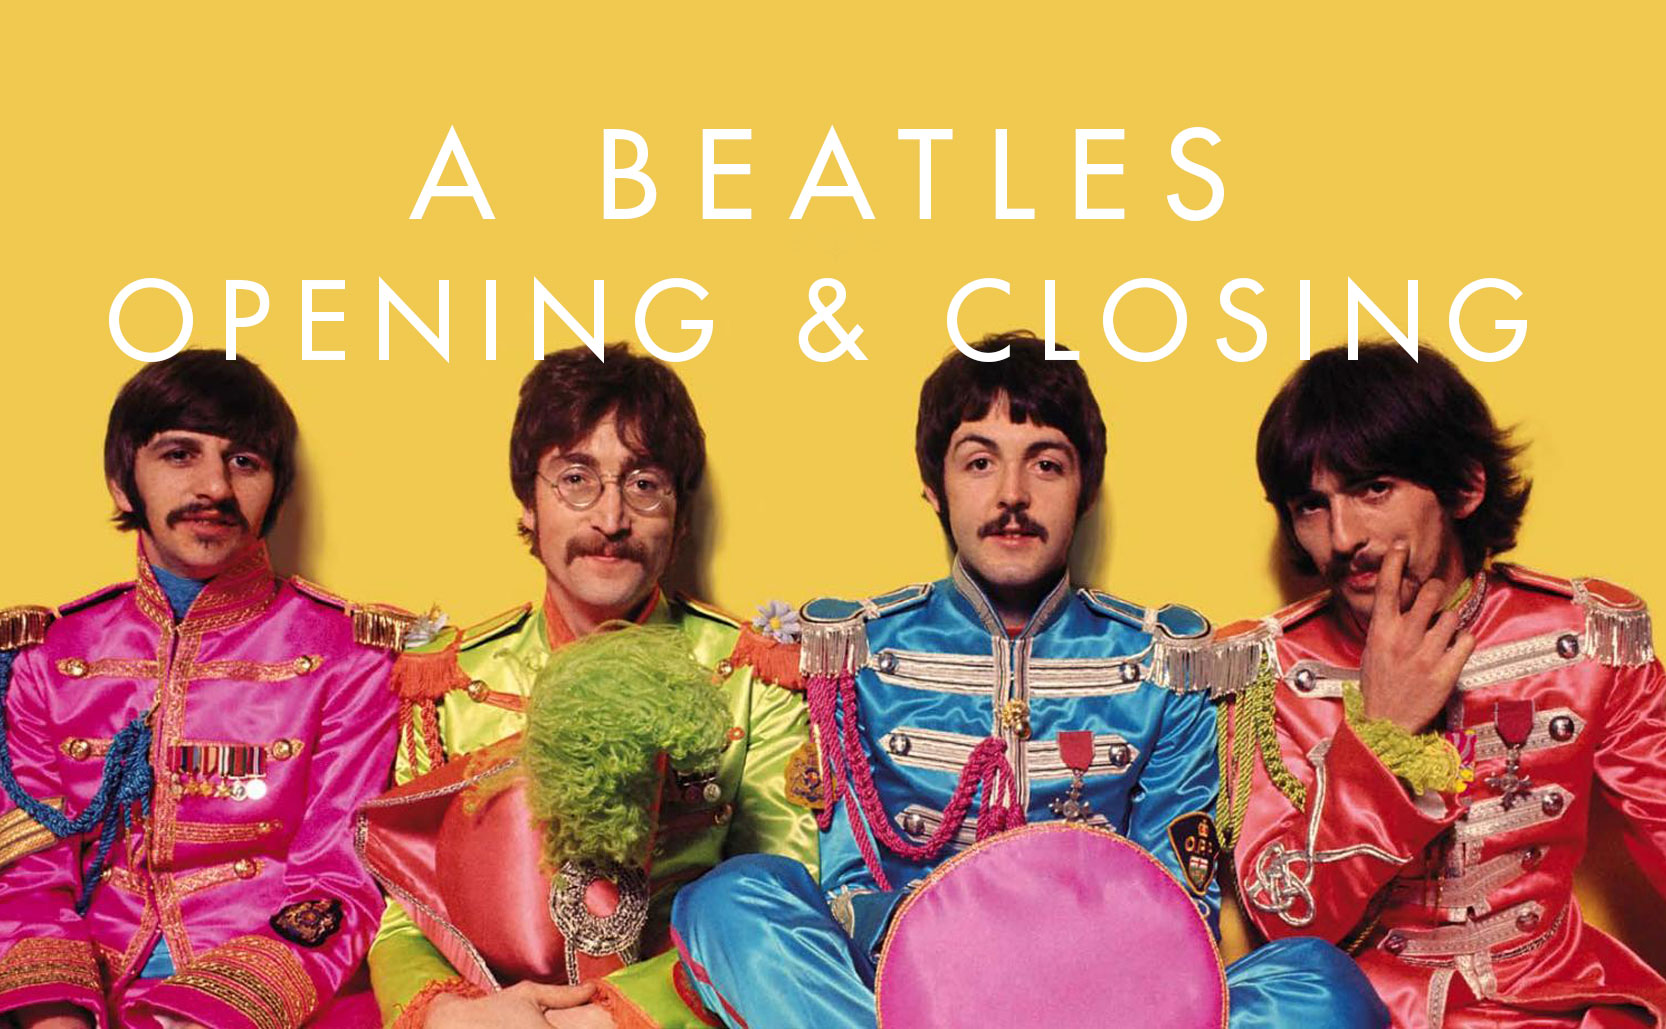 You are currently viewing A Beatles Opening & Closing